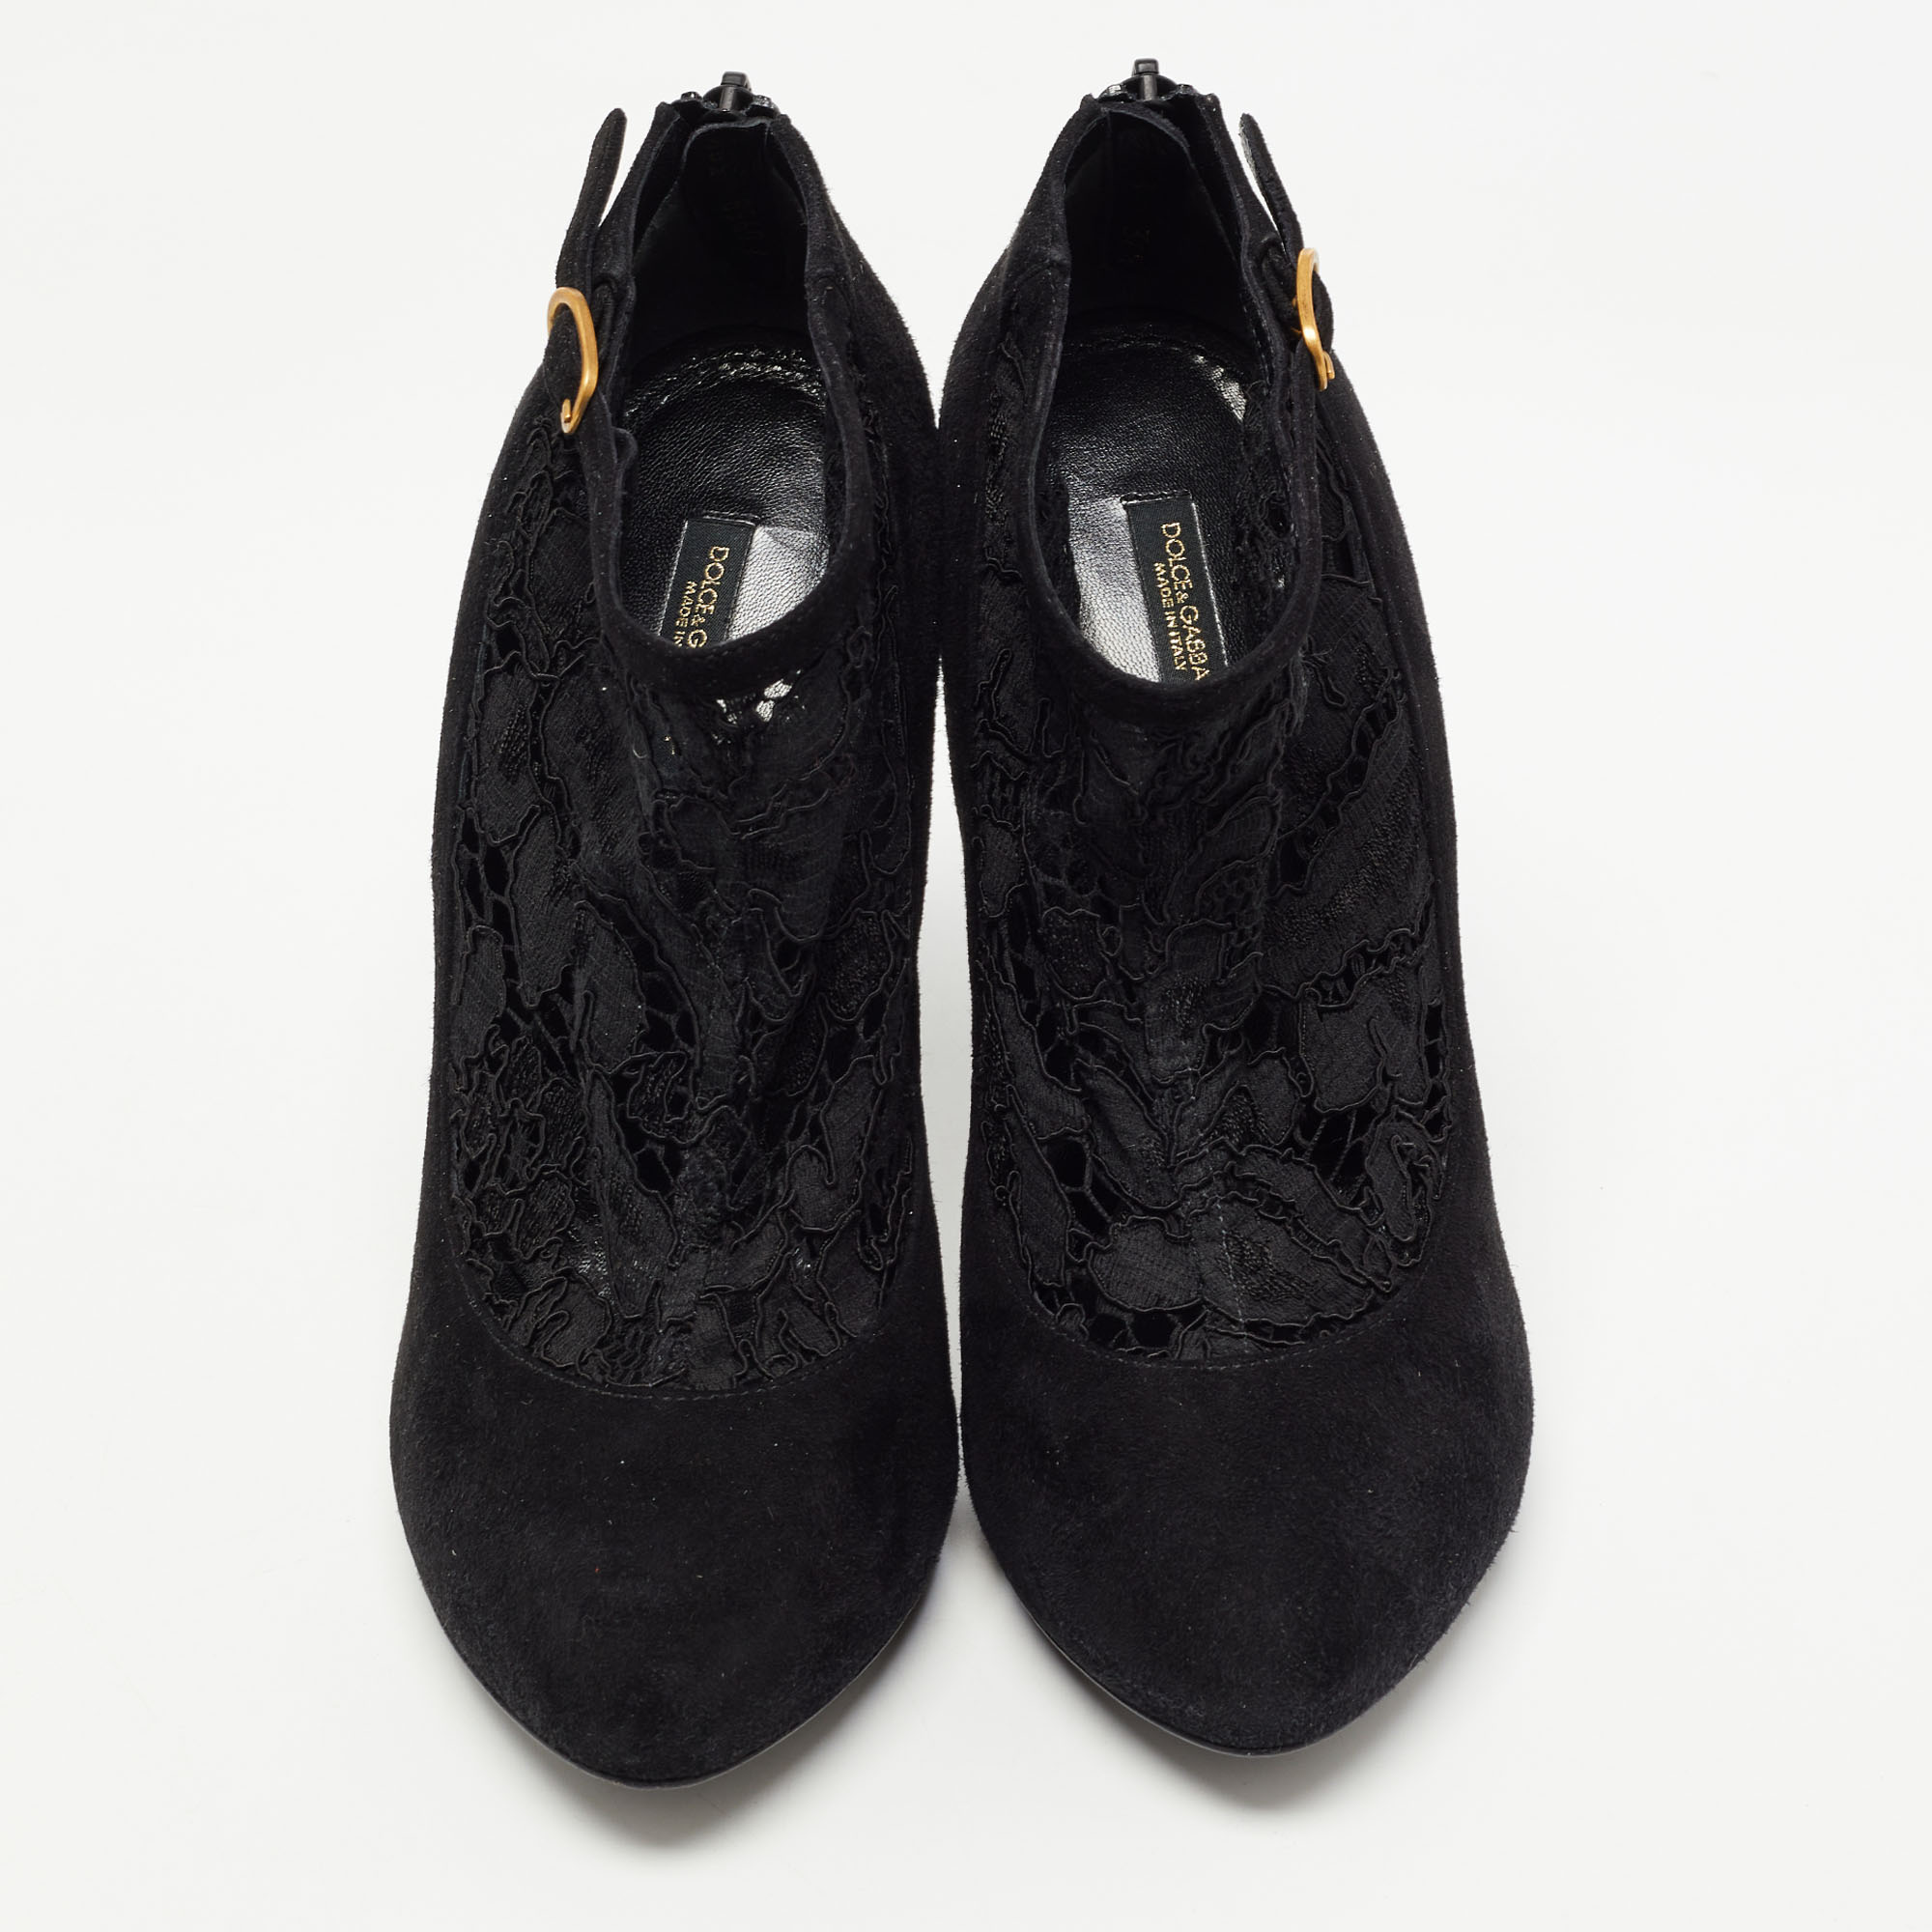 Dolce & Gabbana Black Suede And Lace Pointed Toe Booties Size 38.5